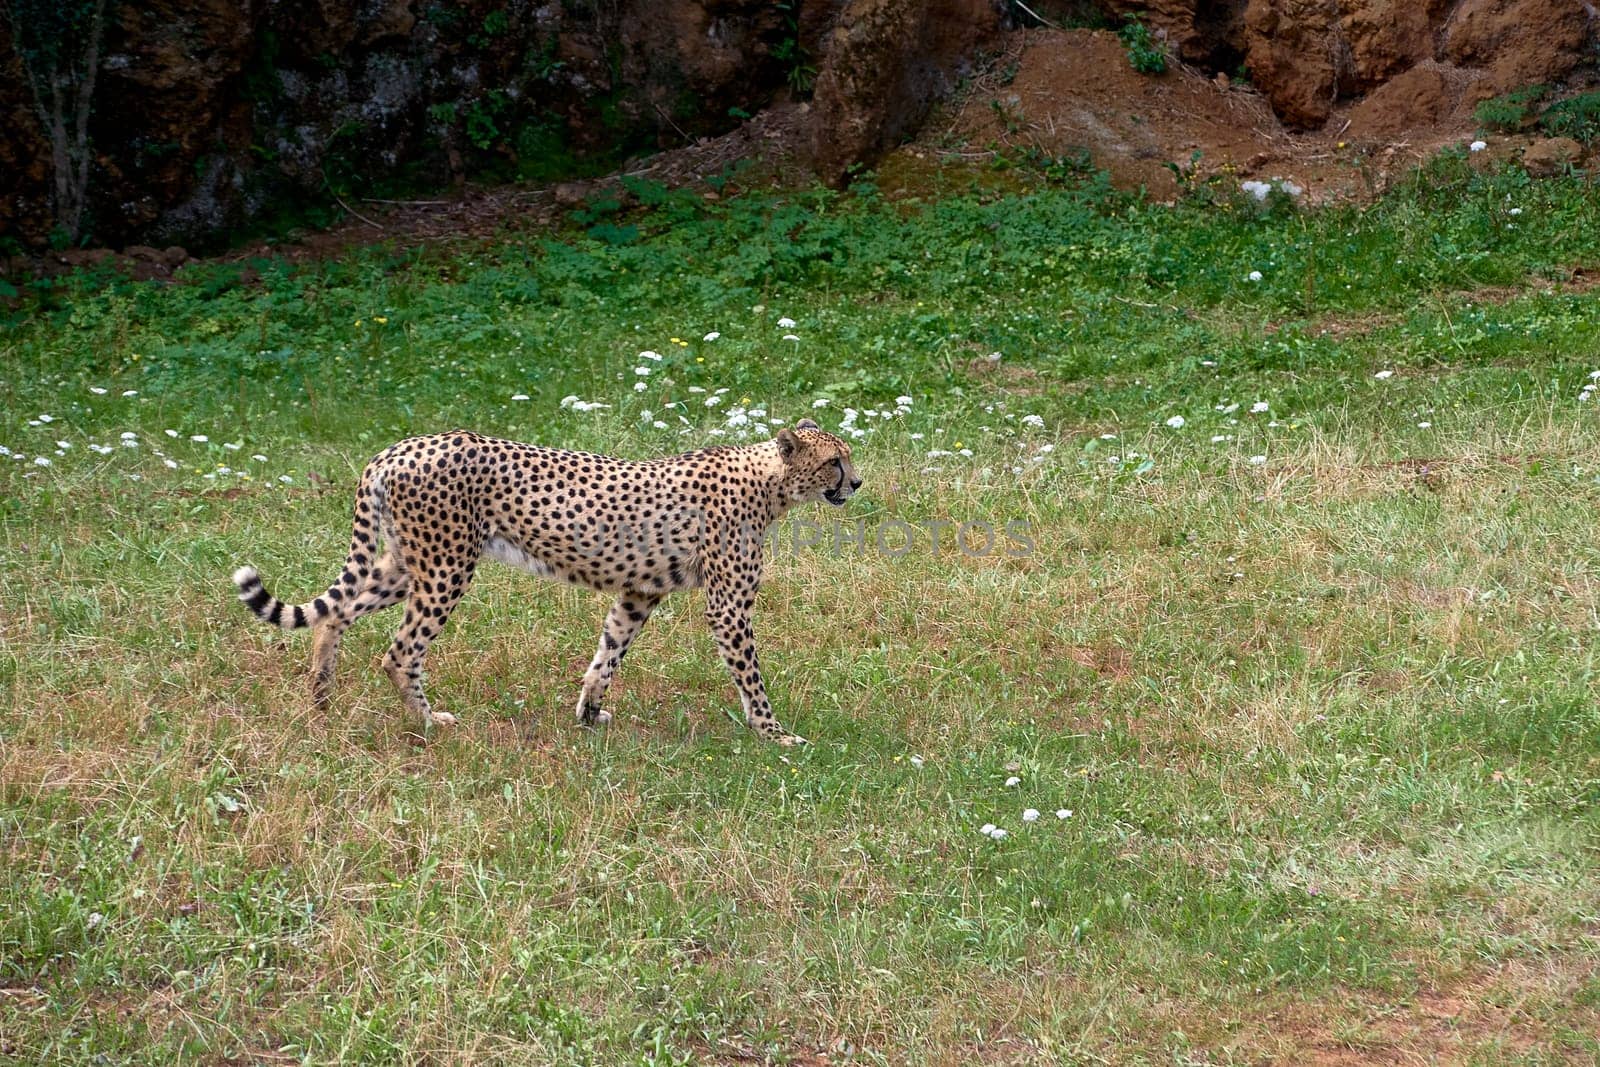 A cheetah standing upright on the dry savannah. green, sunny, spotted, feline, uncrowded